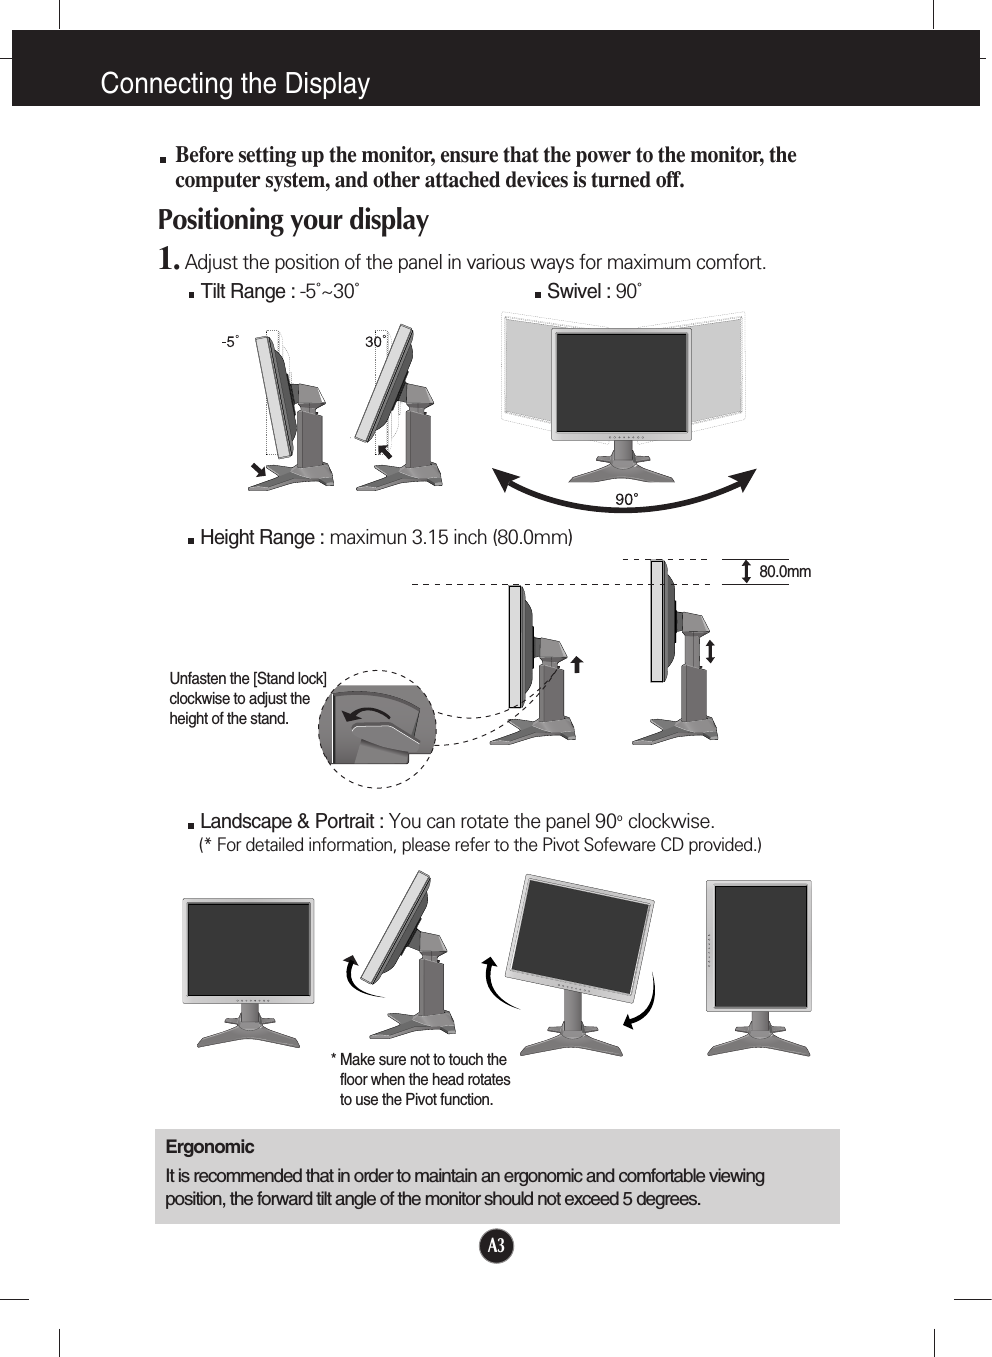 Connecting the DisplayA3Before setting up the monitor, ensure that the power to the monitor, thecomputer system, and other attached devices is turned off. Positioning your display1. Adjust the position of the panel in various ways for maximum comfort.Tilt Range : -5˚~30˚                             Swivel : 90˚ErgonomicIt is recommended that in order to maintain an ergonomic and comfortable viewingposition, the forward tilt angle of the monitor should not exceed 5 degrees.Height Range : maximun 3.15 inch (80.0mm)Landscape &amp; Portrait : You can rotate the panel 90o  clockwise. (* For detailed information, please refer to the Pivot Sofeware CD provided.)* Make sure not to touch thefloor when the head rotatesto use the Pivot function.80.0mmUnfasten the [Stand lock]clockwise to adjust theheight of the stand.